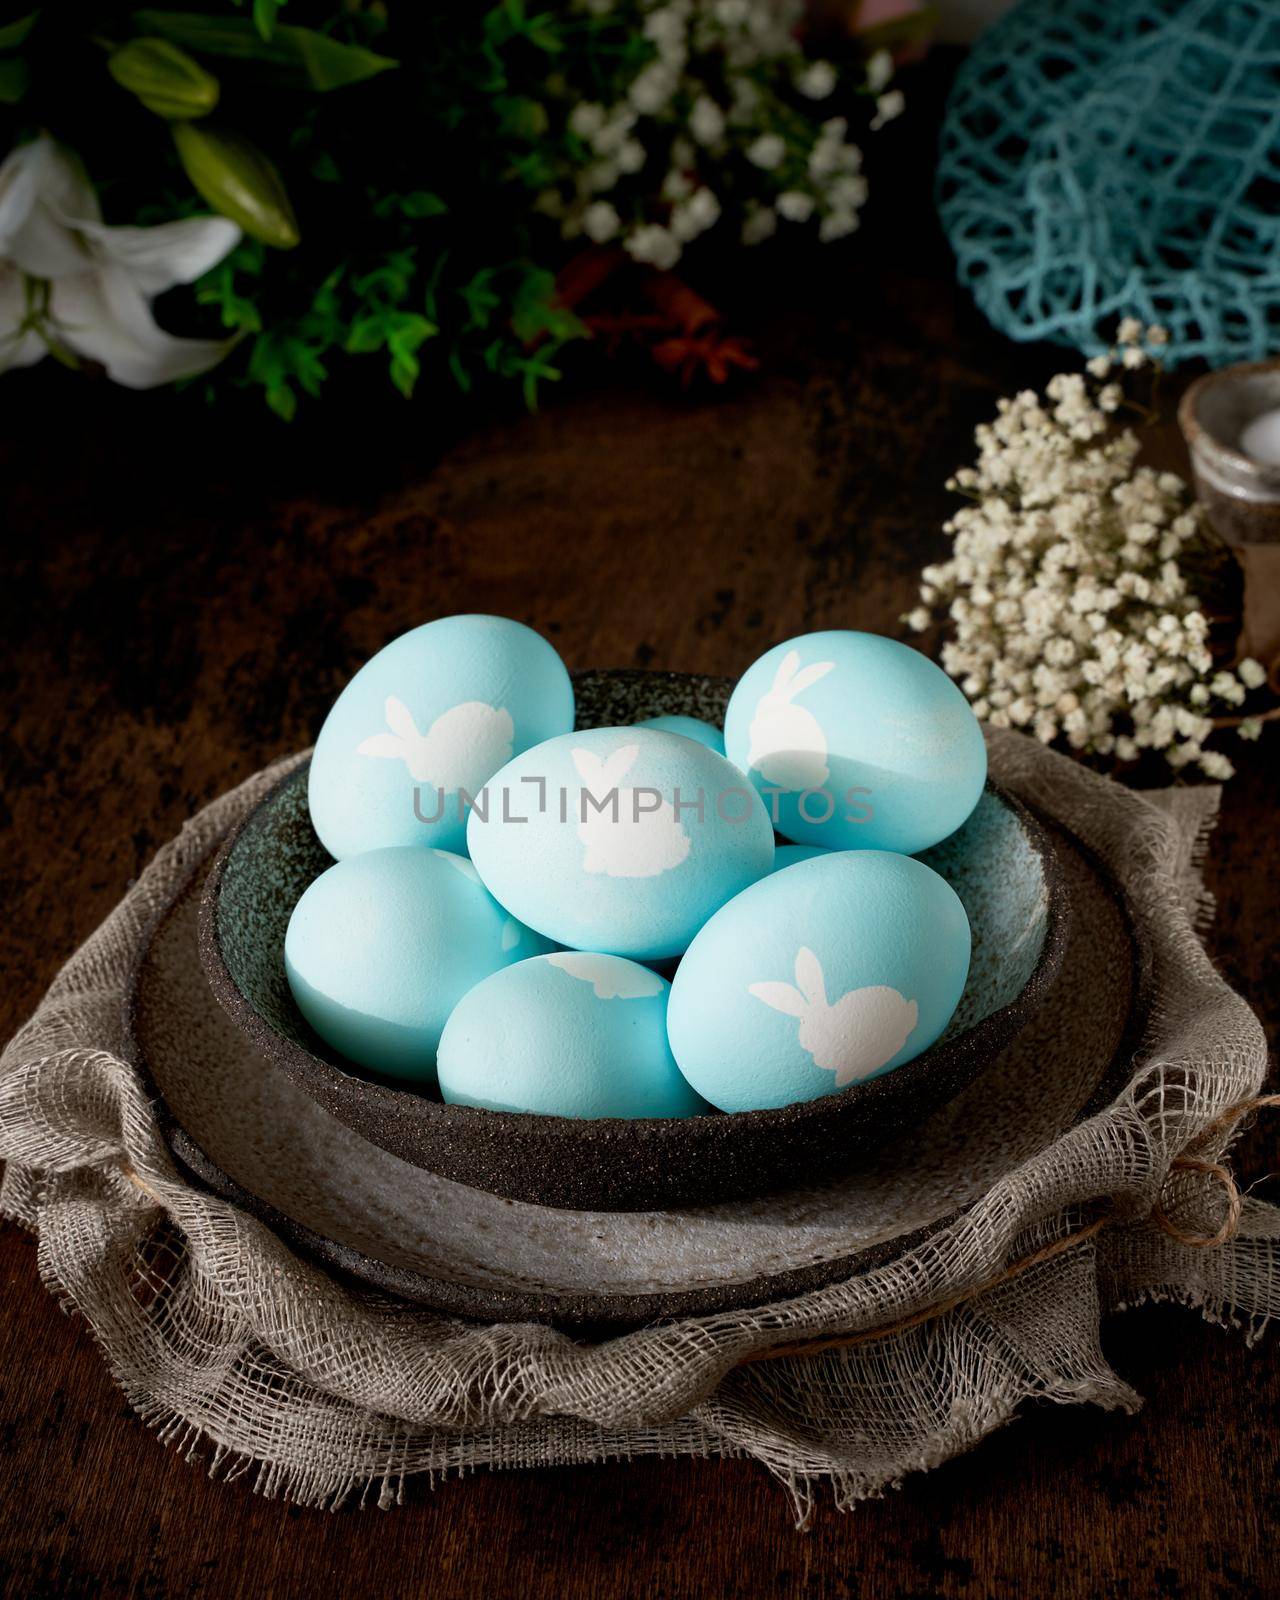 Unusual Easter on dark old background. Ceramic brown bowl with blue eggs. Darkness, rays of sunlight shine on eggs. Concept of new life, rebirth. Rustic style. Vertical, copy space